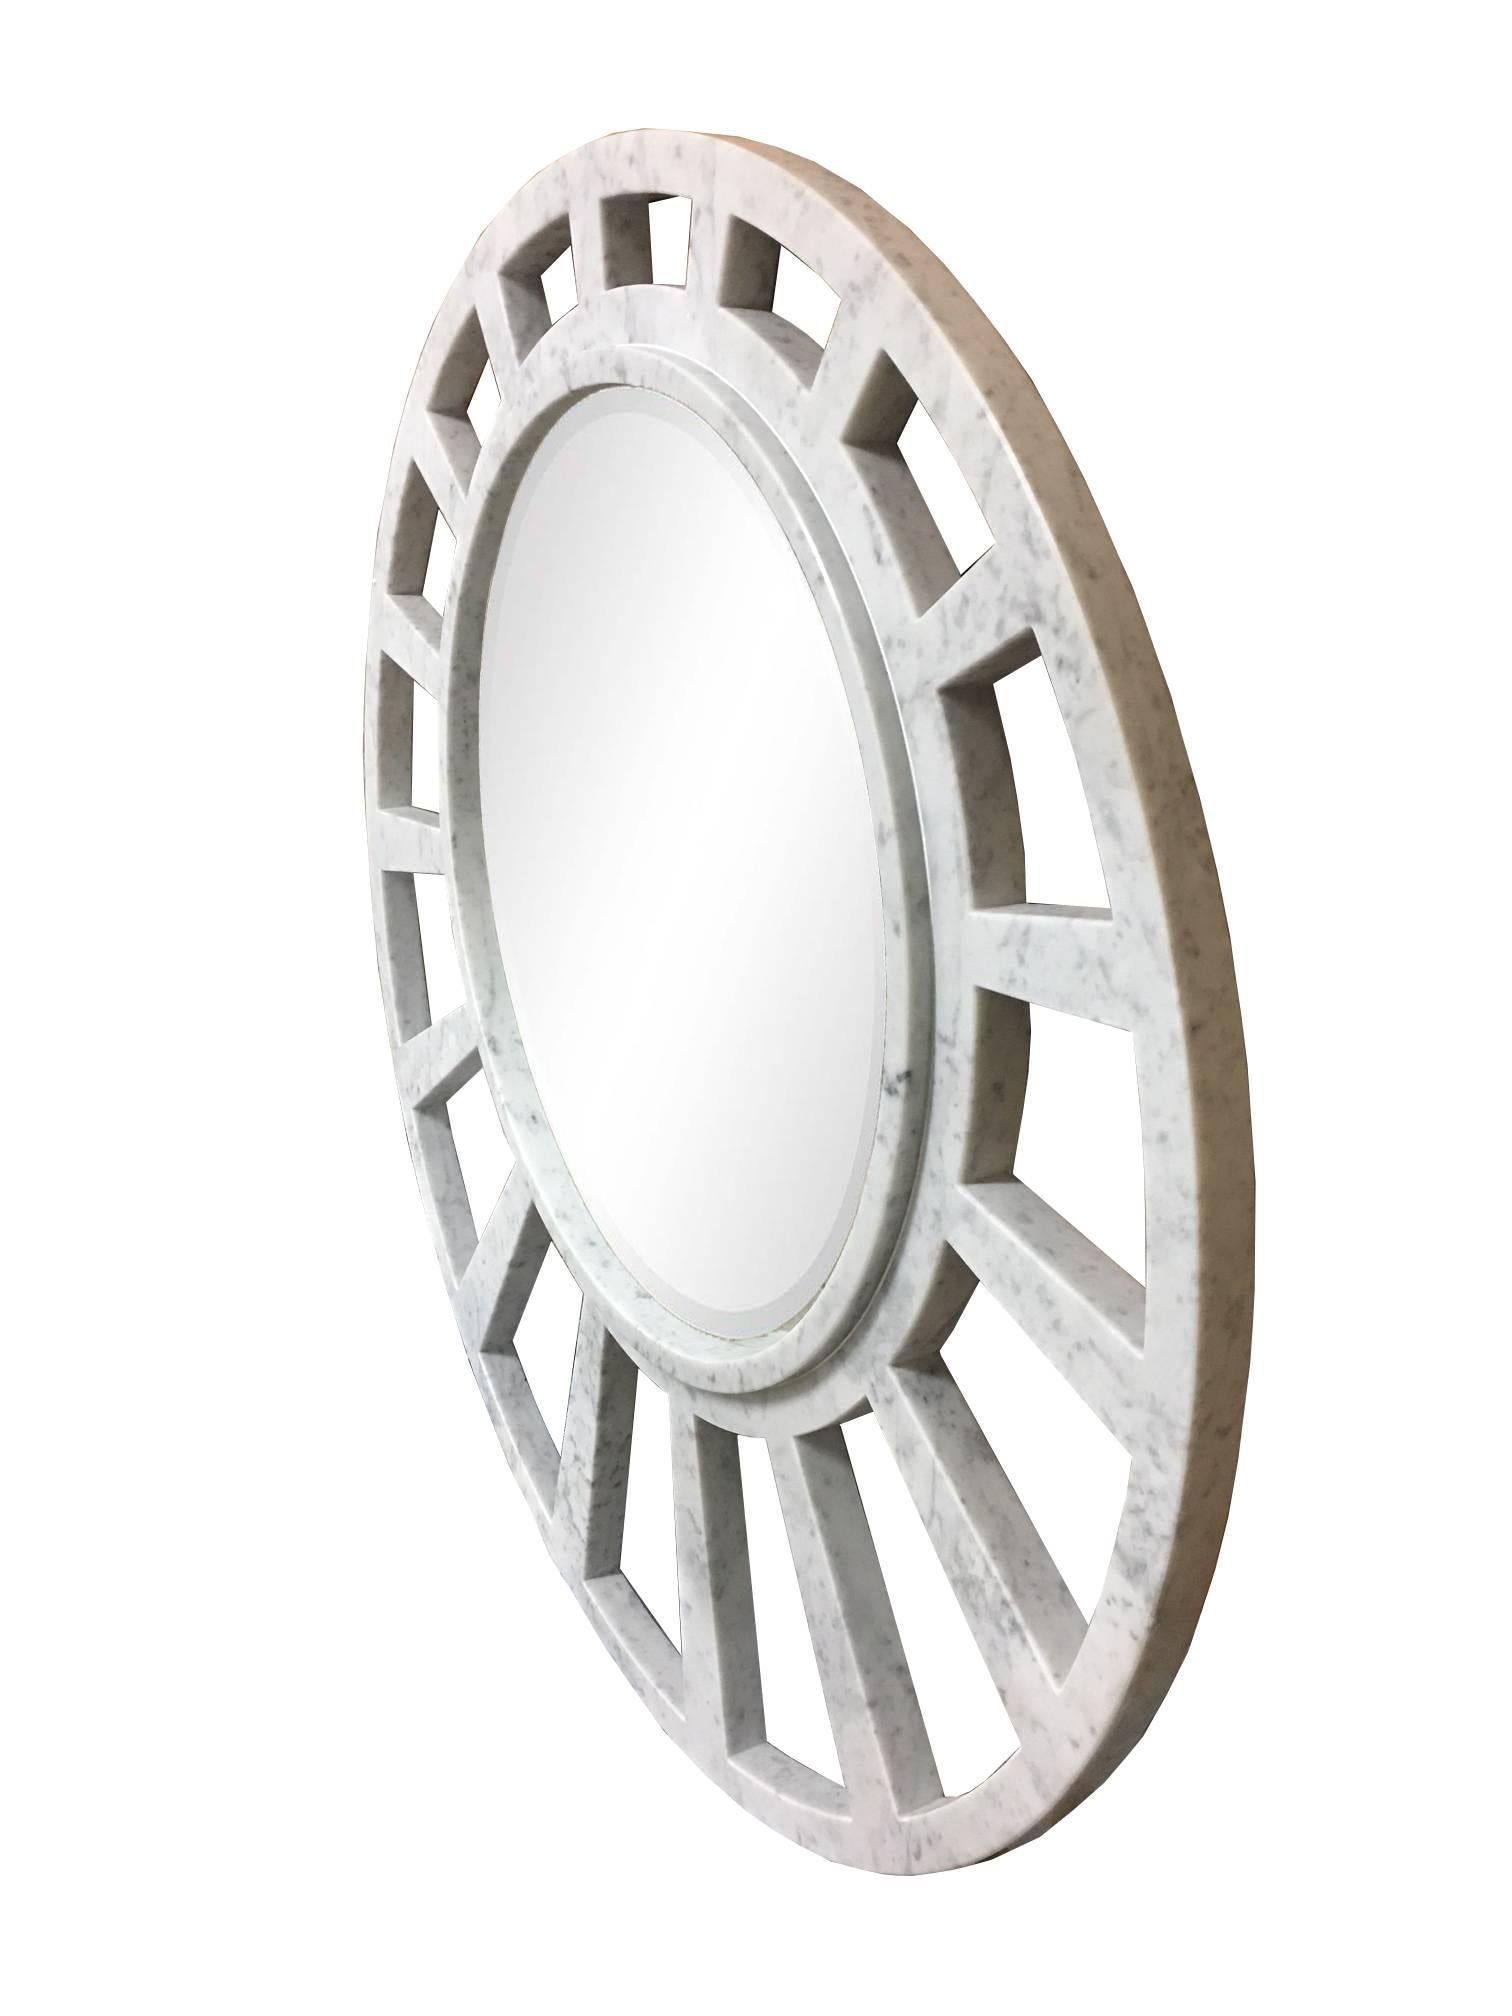 Italian white Carrara marble mirror in handcrafted construction with open geometric pattern appearing elliptical which frames a large mirror. The open framework pattern simulates a sober, modern sunburst form.

Custom sizes are available.